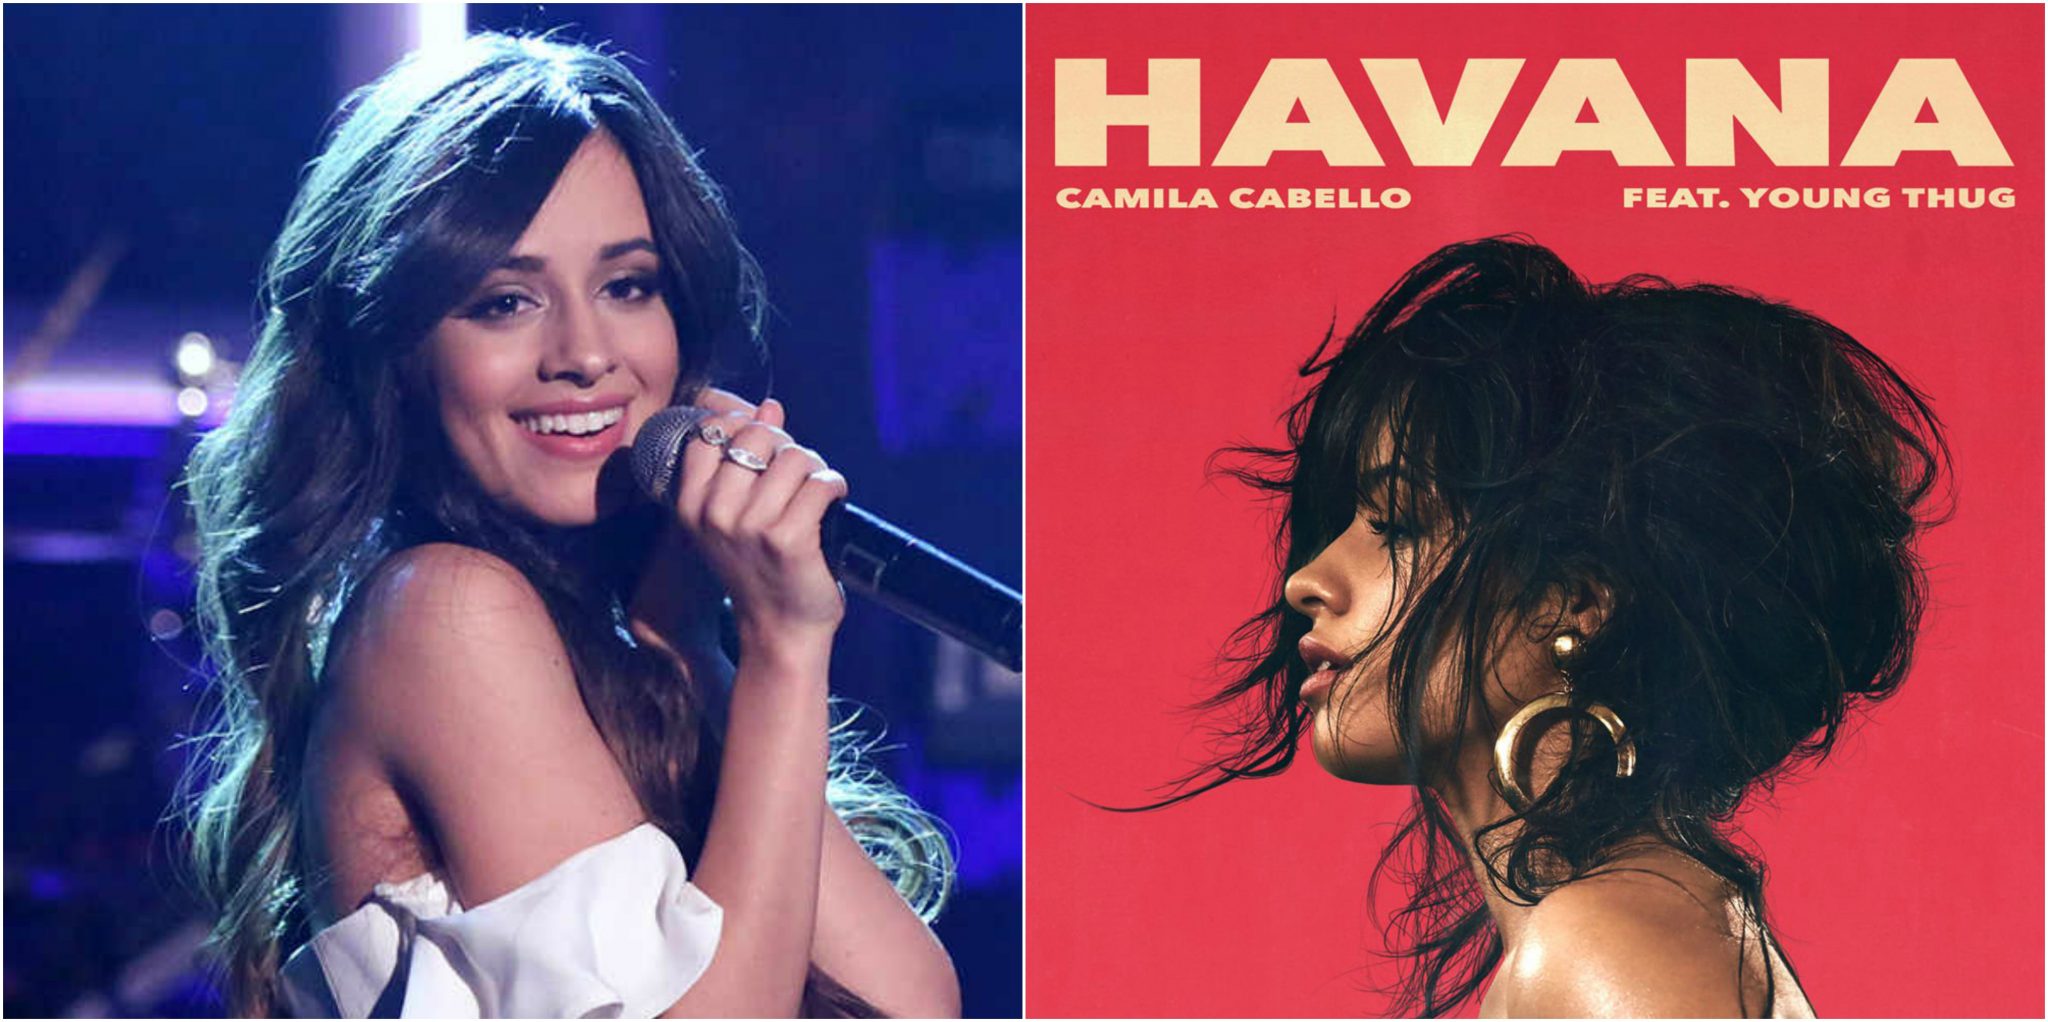 Camila Cabello's Reaches #1 On iTunes Worldwide, Theatrical Video Now - Sherpa Land